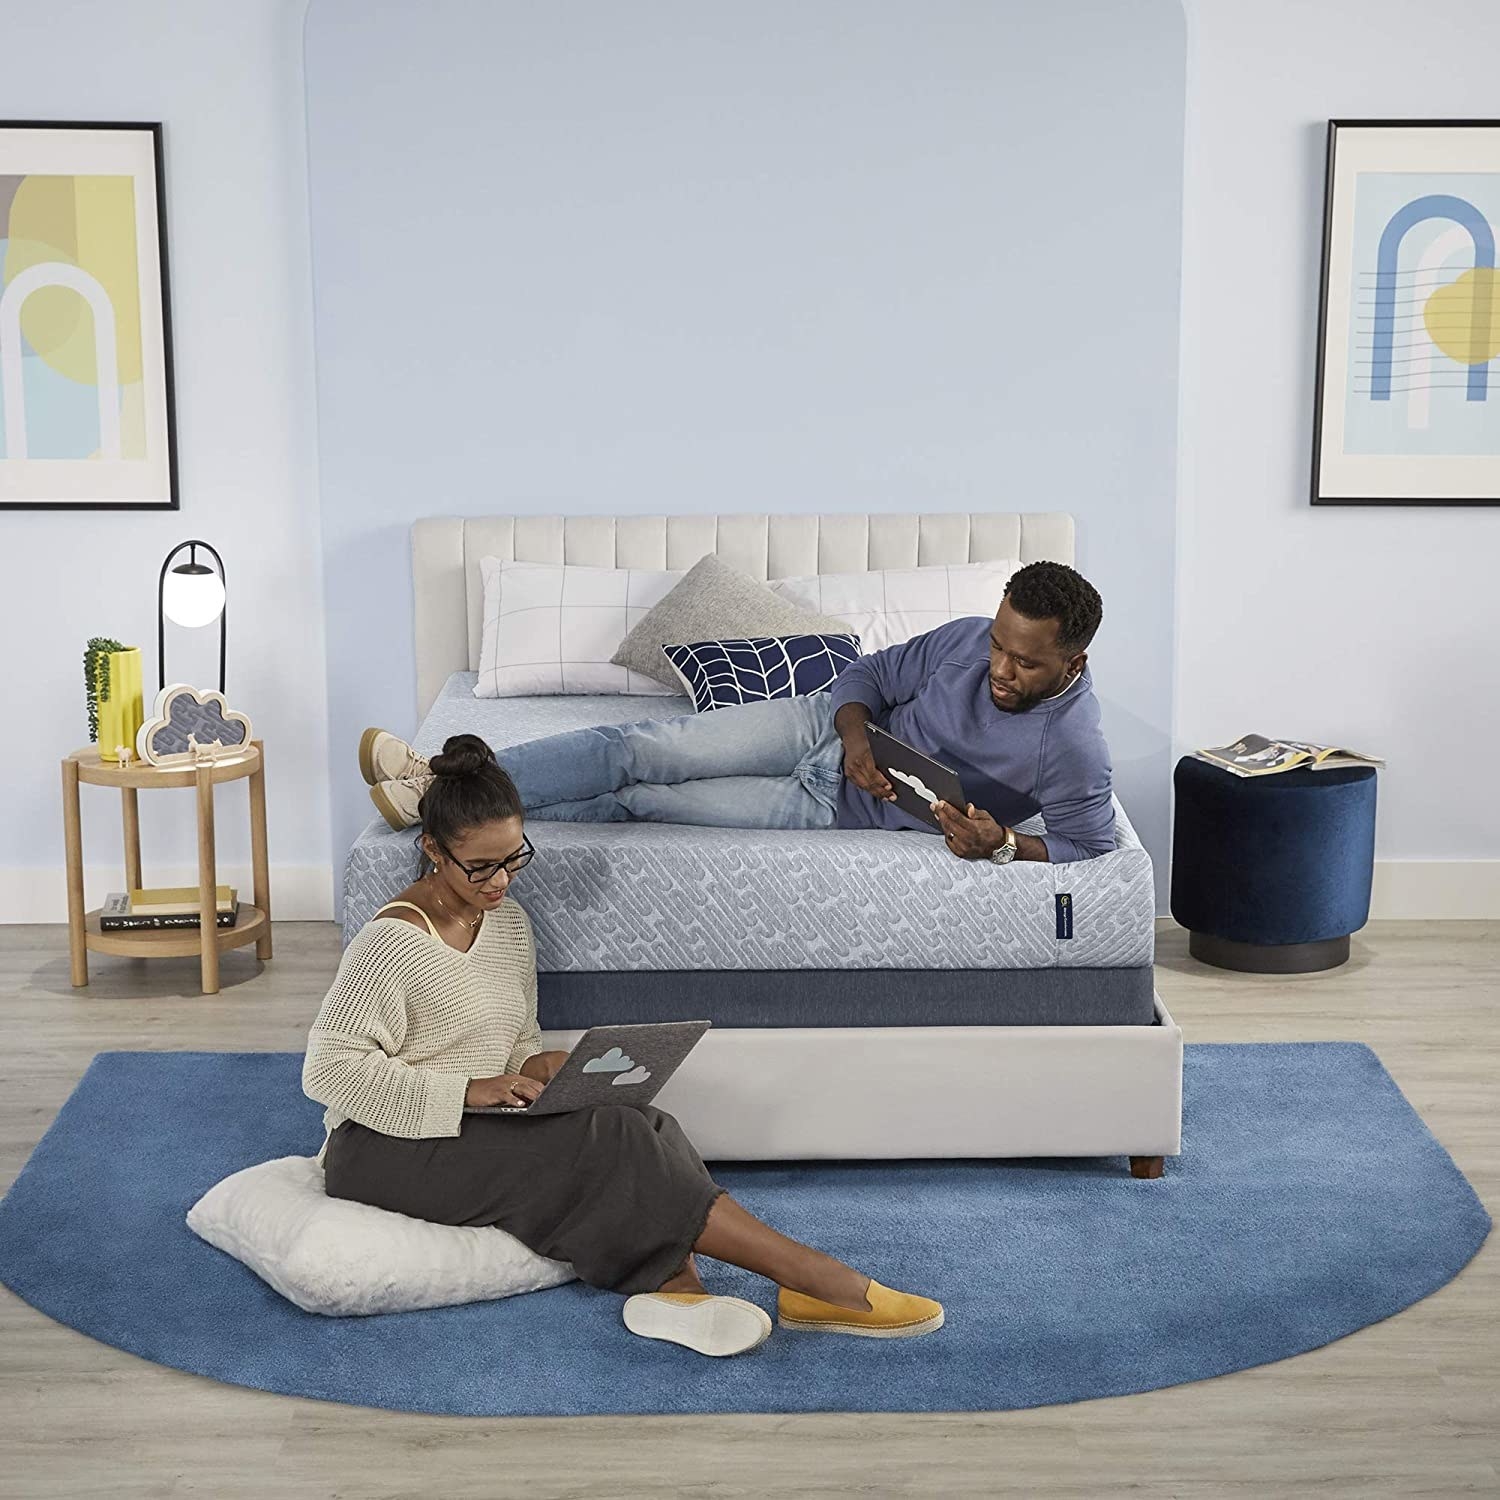 Man laying on 9-inch mattress next to woman sitting on floor